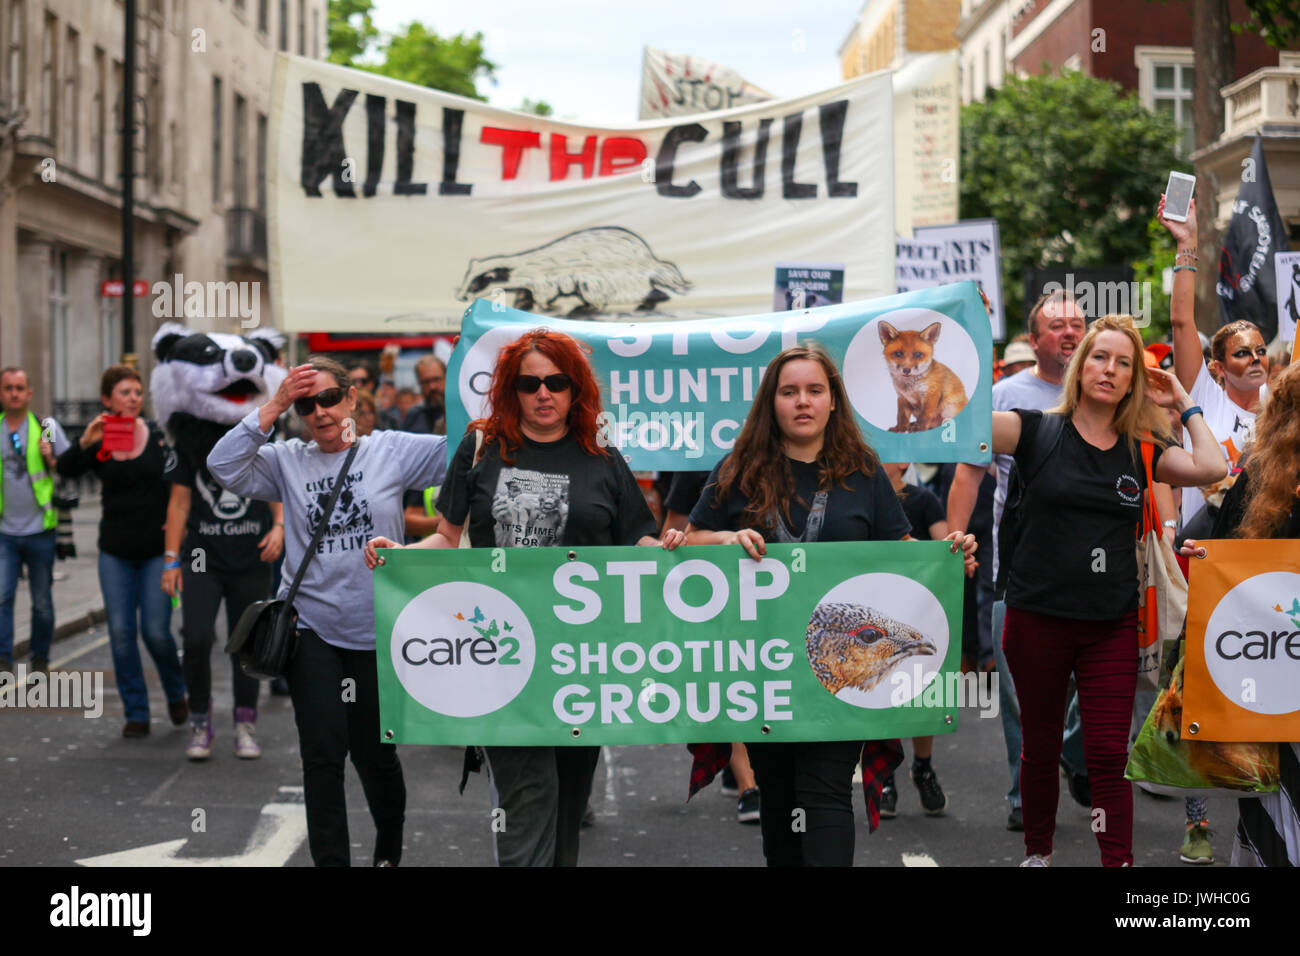 London, UK. 12th Aug, 2017. The Badger Trust, the Make Hunting History coalition and Care2 hold a joint protest march to Downing Street to call on the Conservative government to bring an immediate end to the badger cull policy and to strengthen rather than seek to repeal the Hunting Act. Penelope Barritt/Alamy Live News Stock Photo